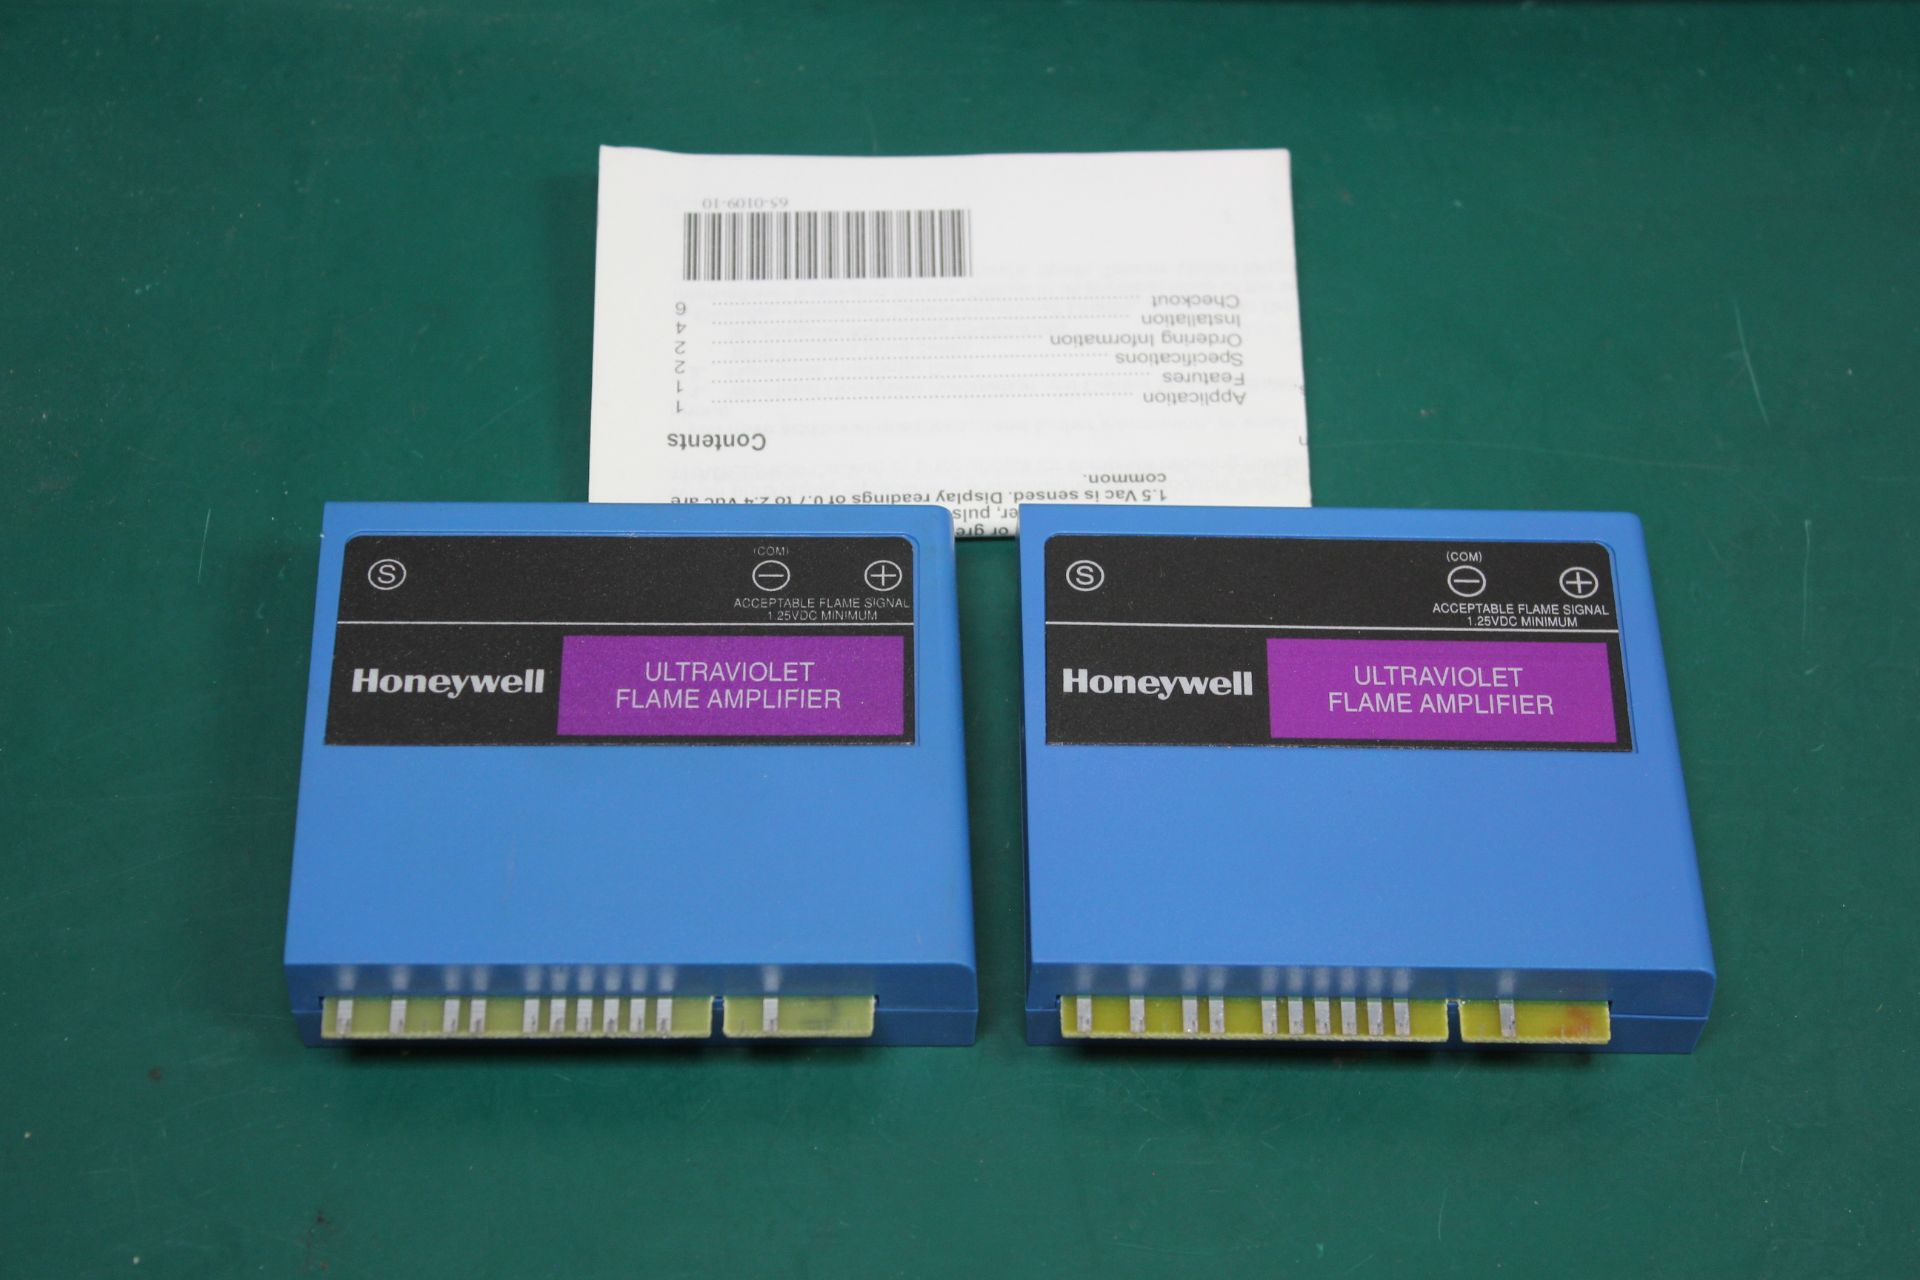 LOT OF 2 HONEYWELL ULTRAVIOLET FLAME AMPLIFIERS - Image 3 of 5